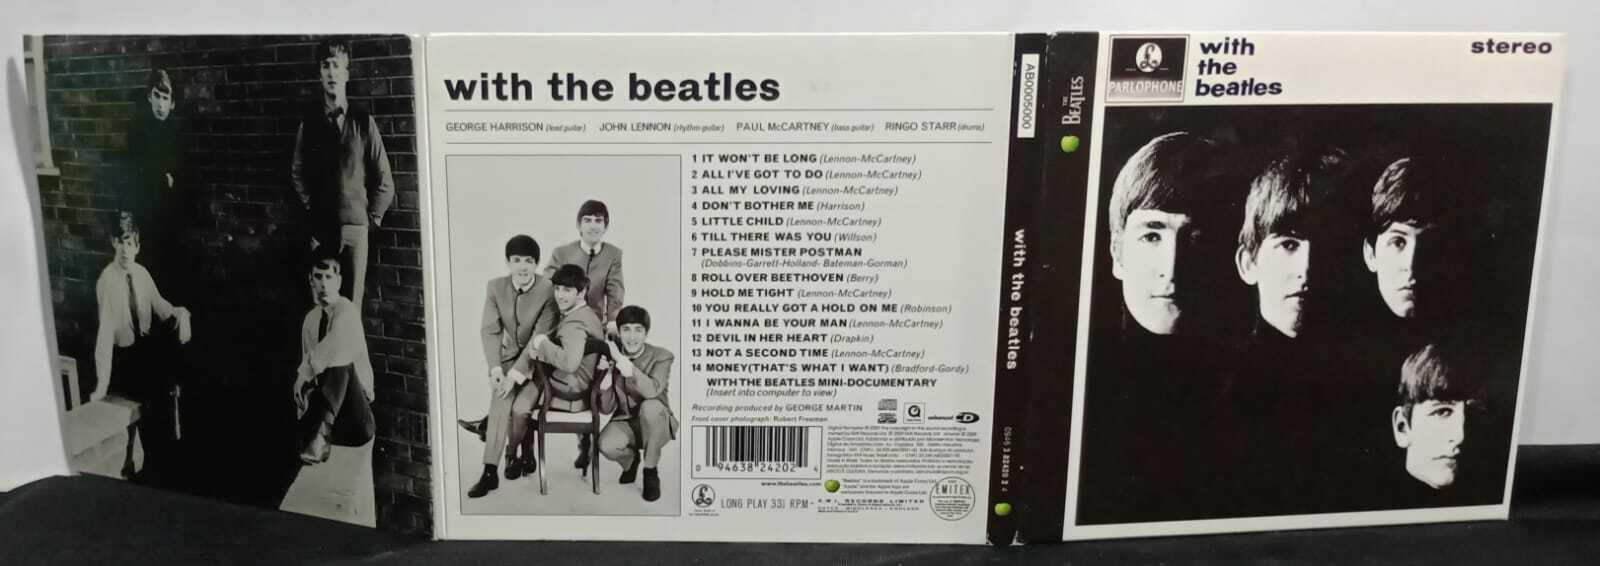 CD - Beatles the - With the Beatles